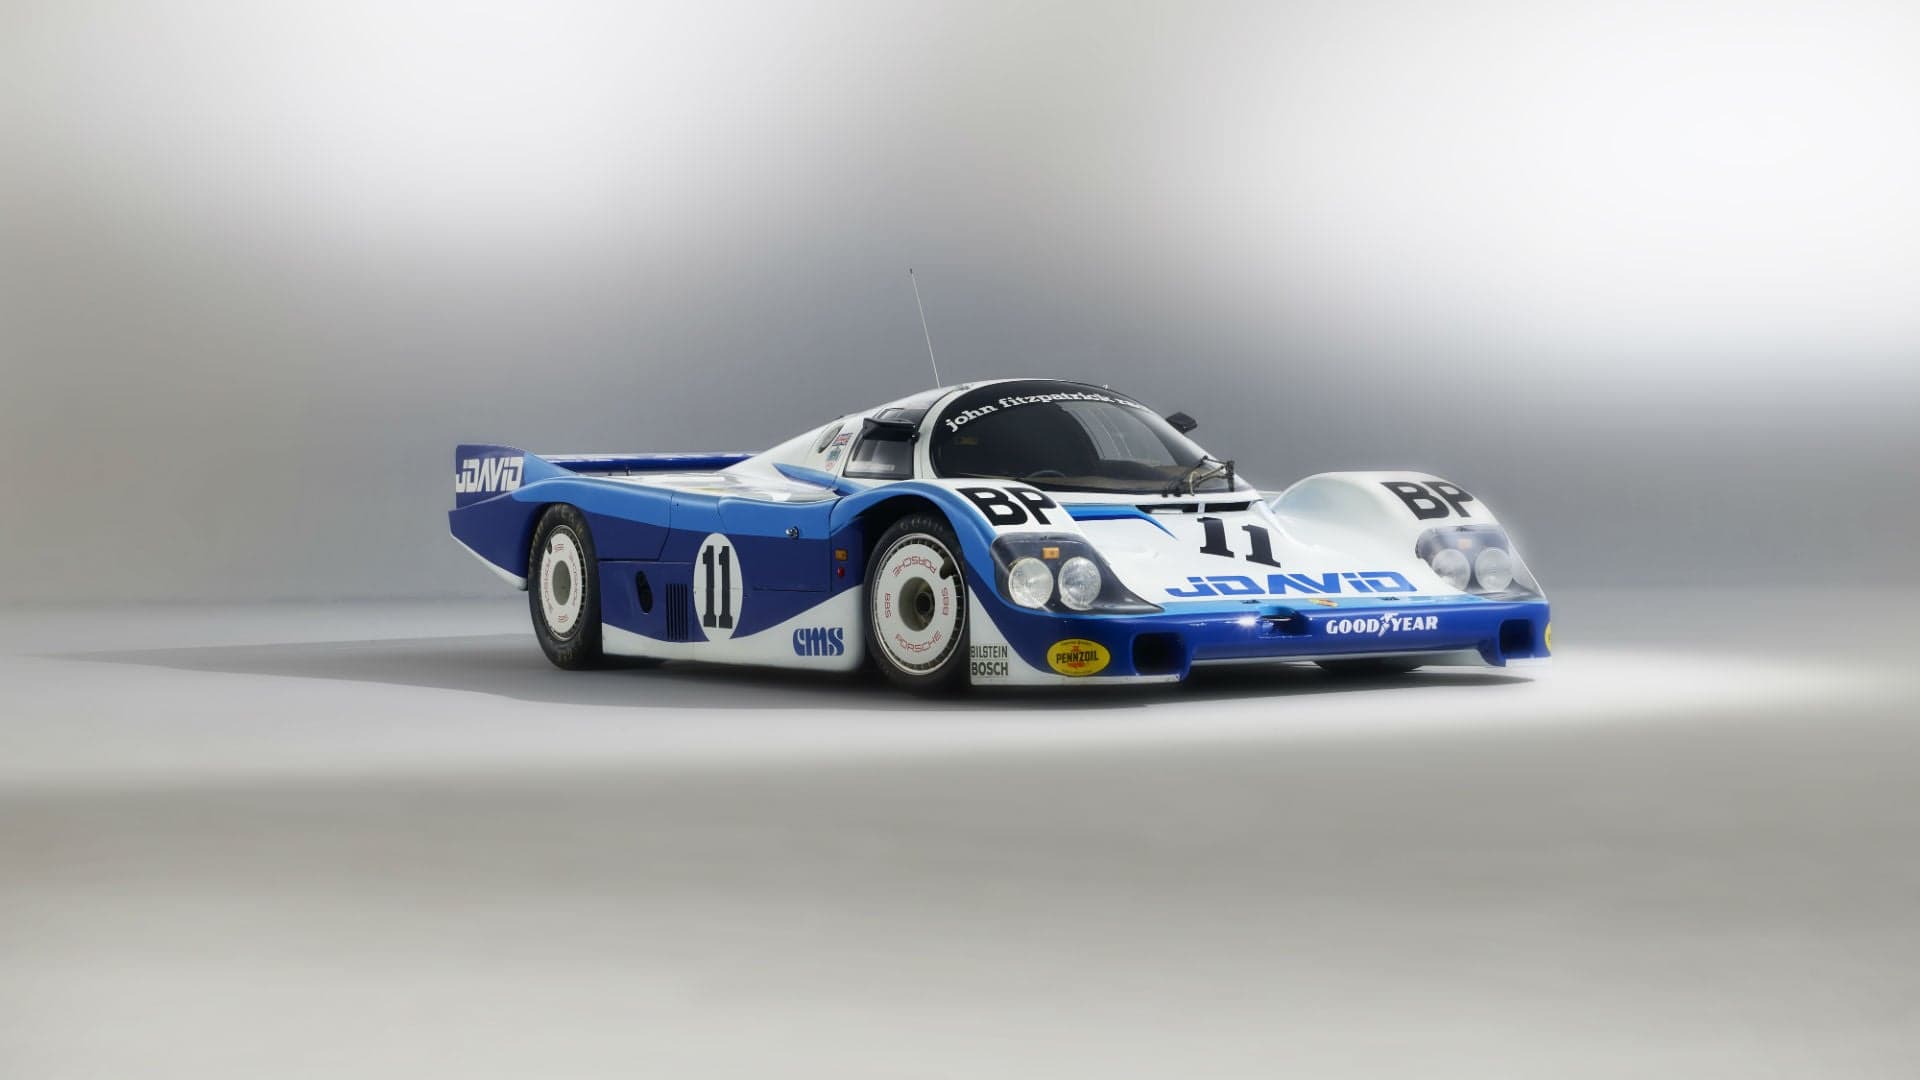 This Highly-Decorated, Highly-Original Porsche 956 Heads to Auction